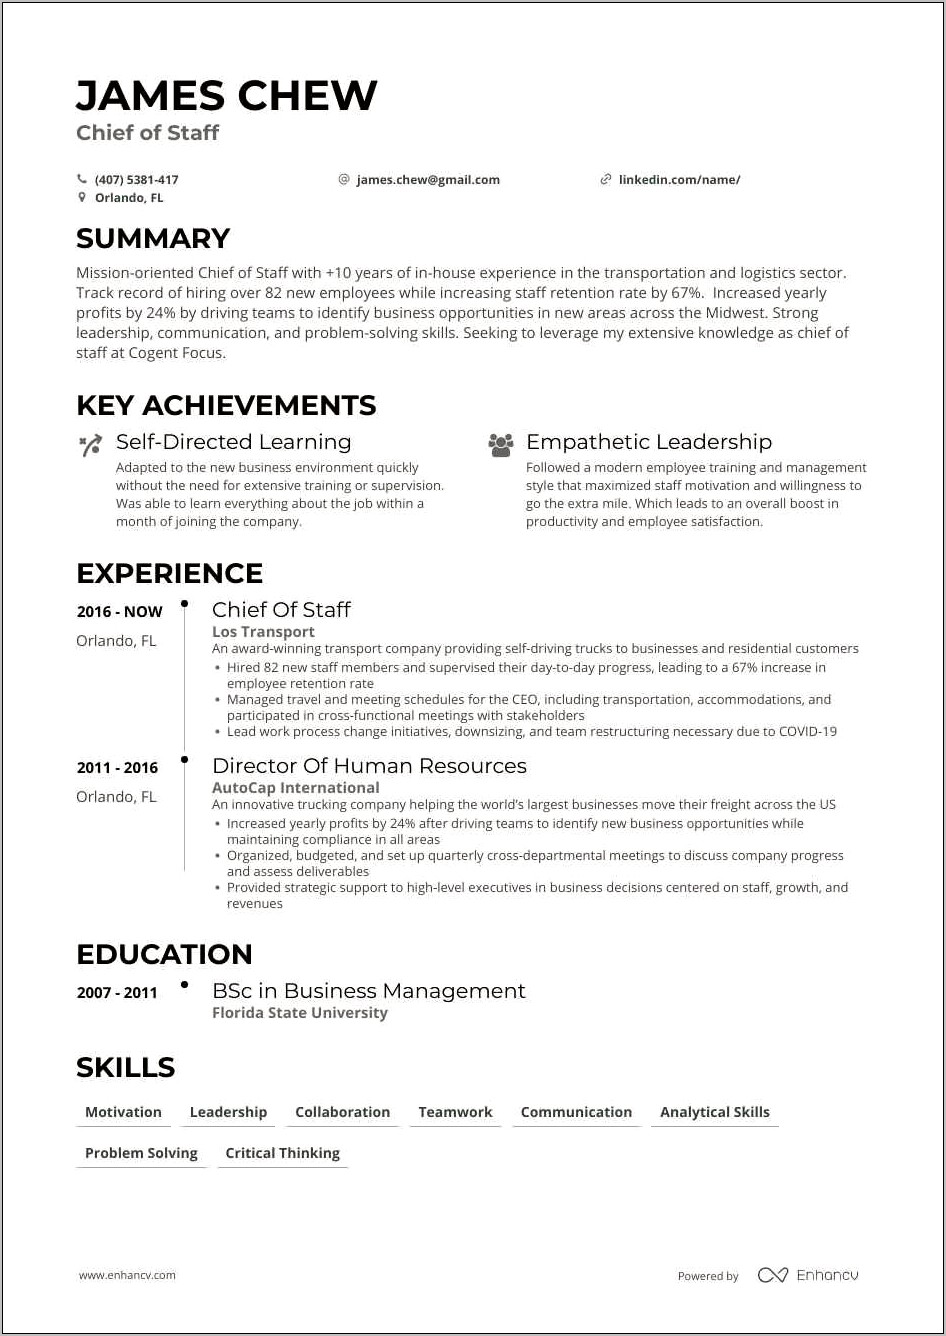 Critical And Analytical Thinking Skills Resume Sample